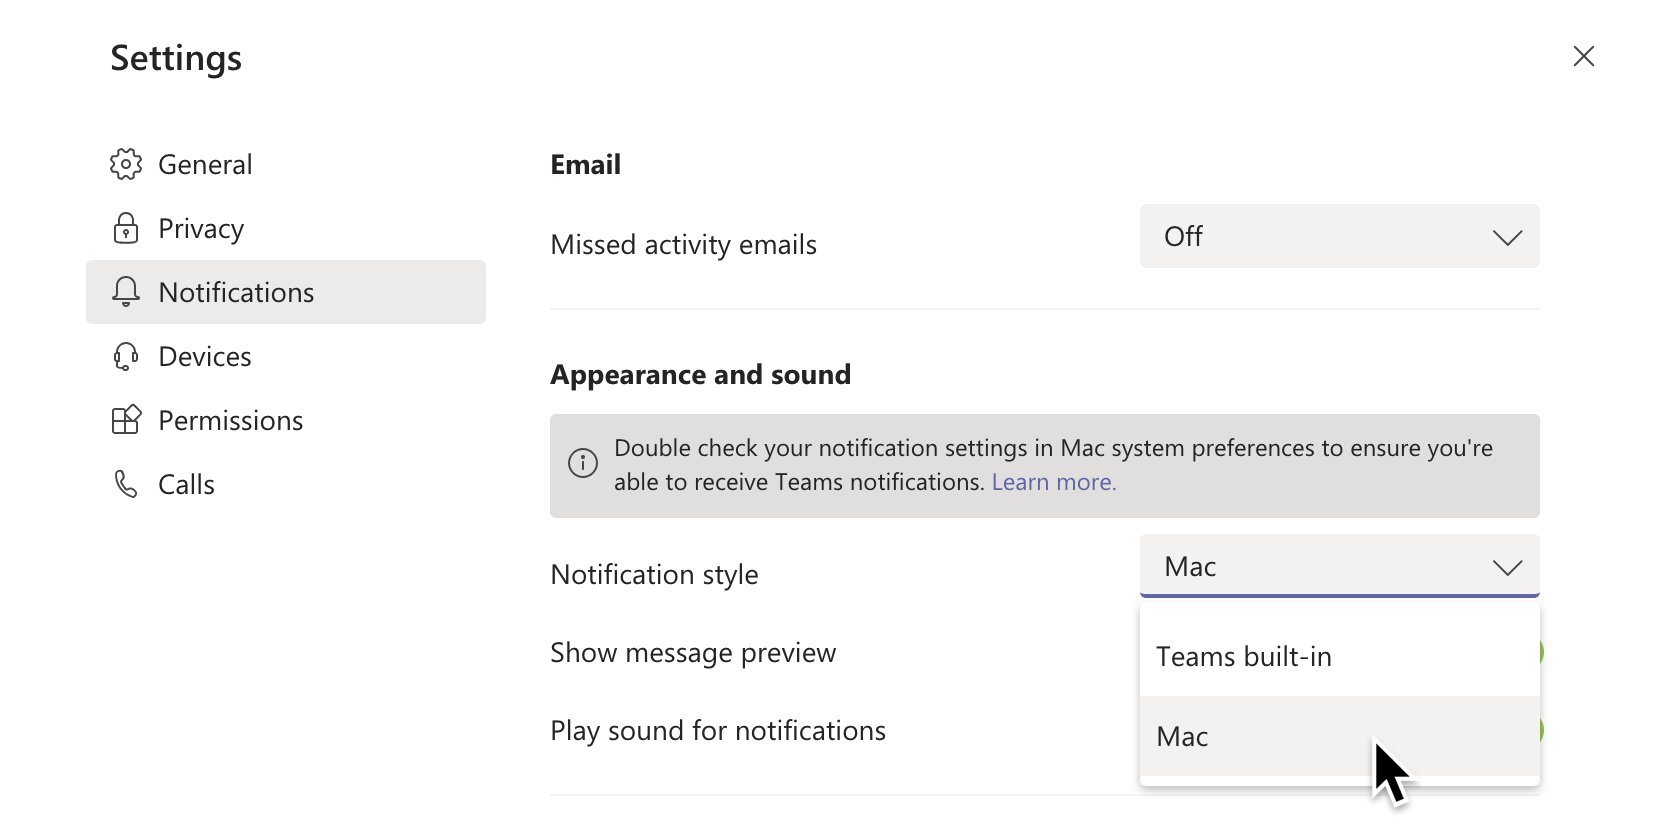 Microsoft Teams Preview now offers the option of native OS or custom notifications